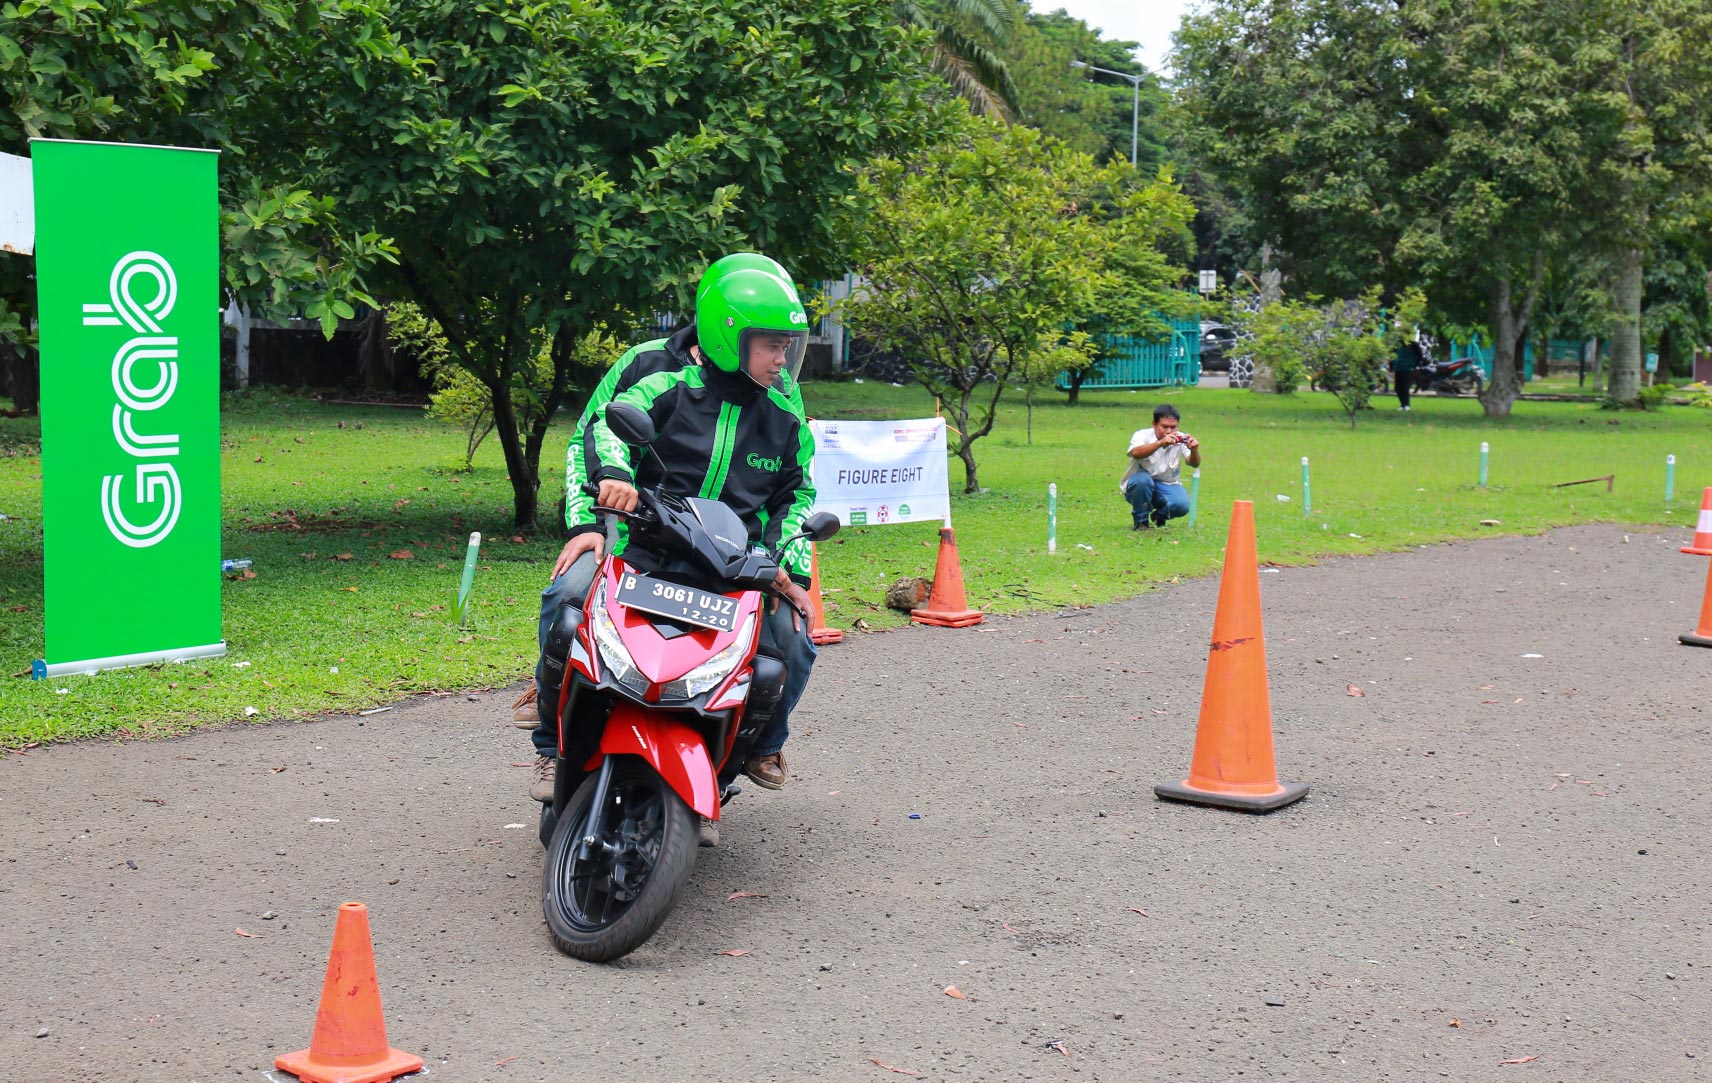 Grab Introduces Defensive Safety Riding Test To Screen New Grabbike Bikers Grab Id